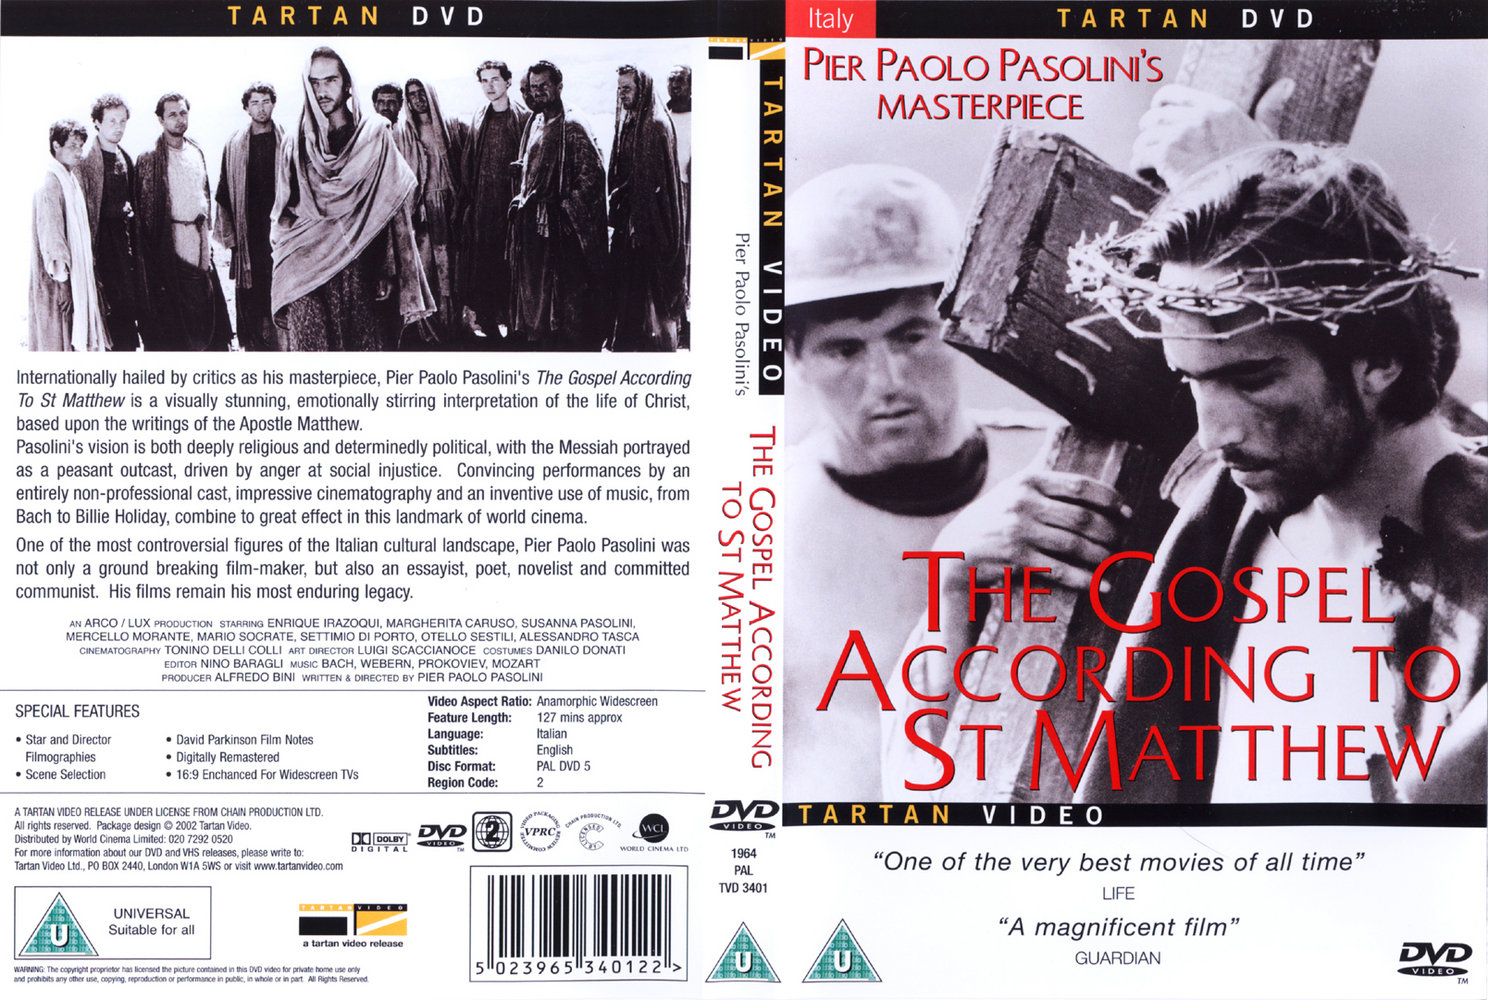 The Gospel According To St Matthew Pier Paolo Pasolini 1964 British Dvd Tartan Video Free Download Borrow And Streaming Internet Archive It is a romance, crime and the gospel according to matthew: the gospel according to st matthew